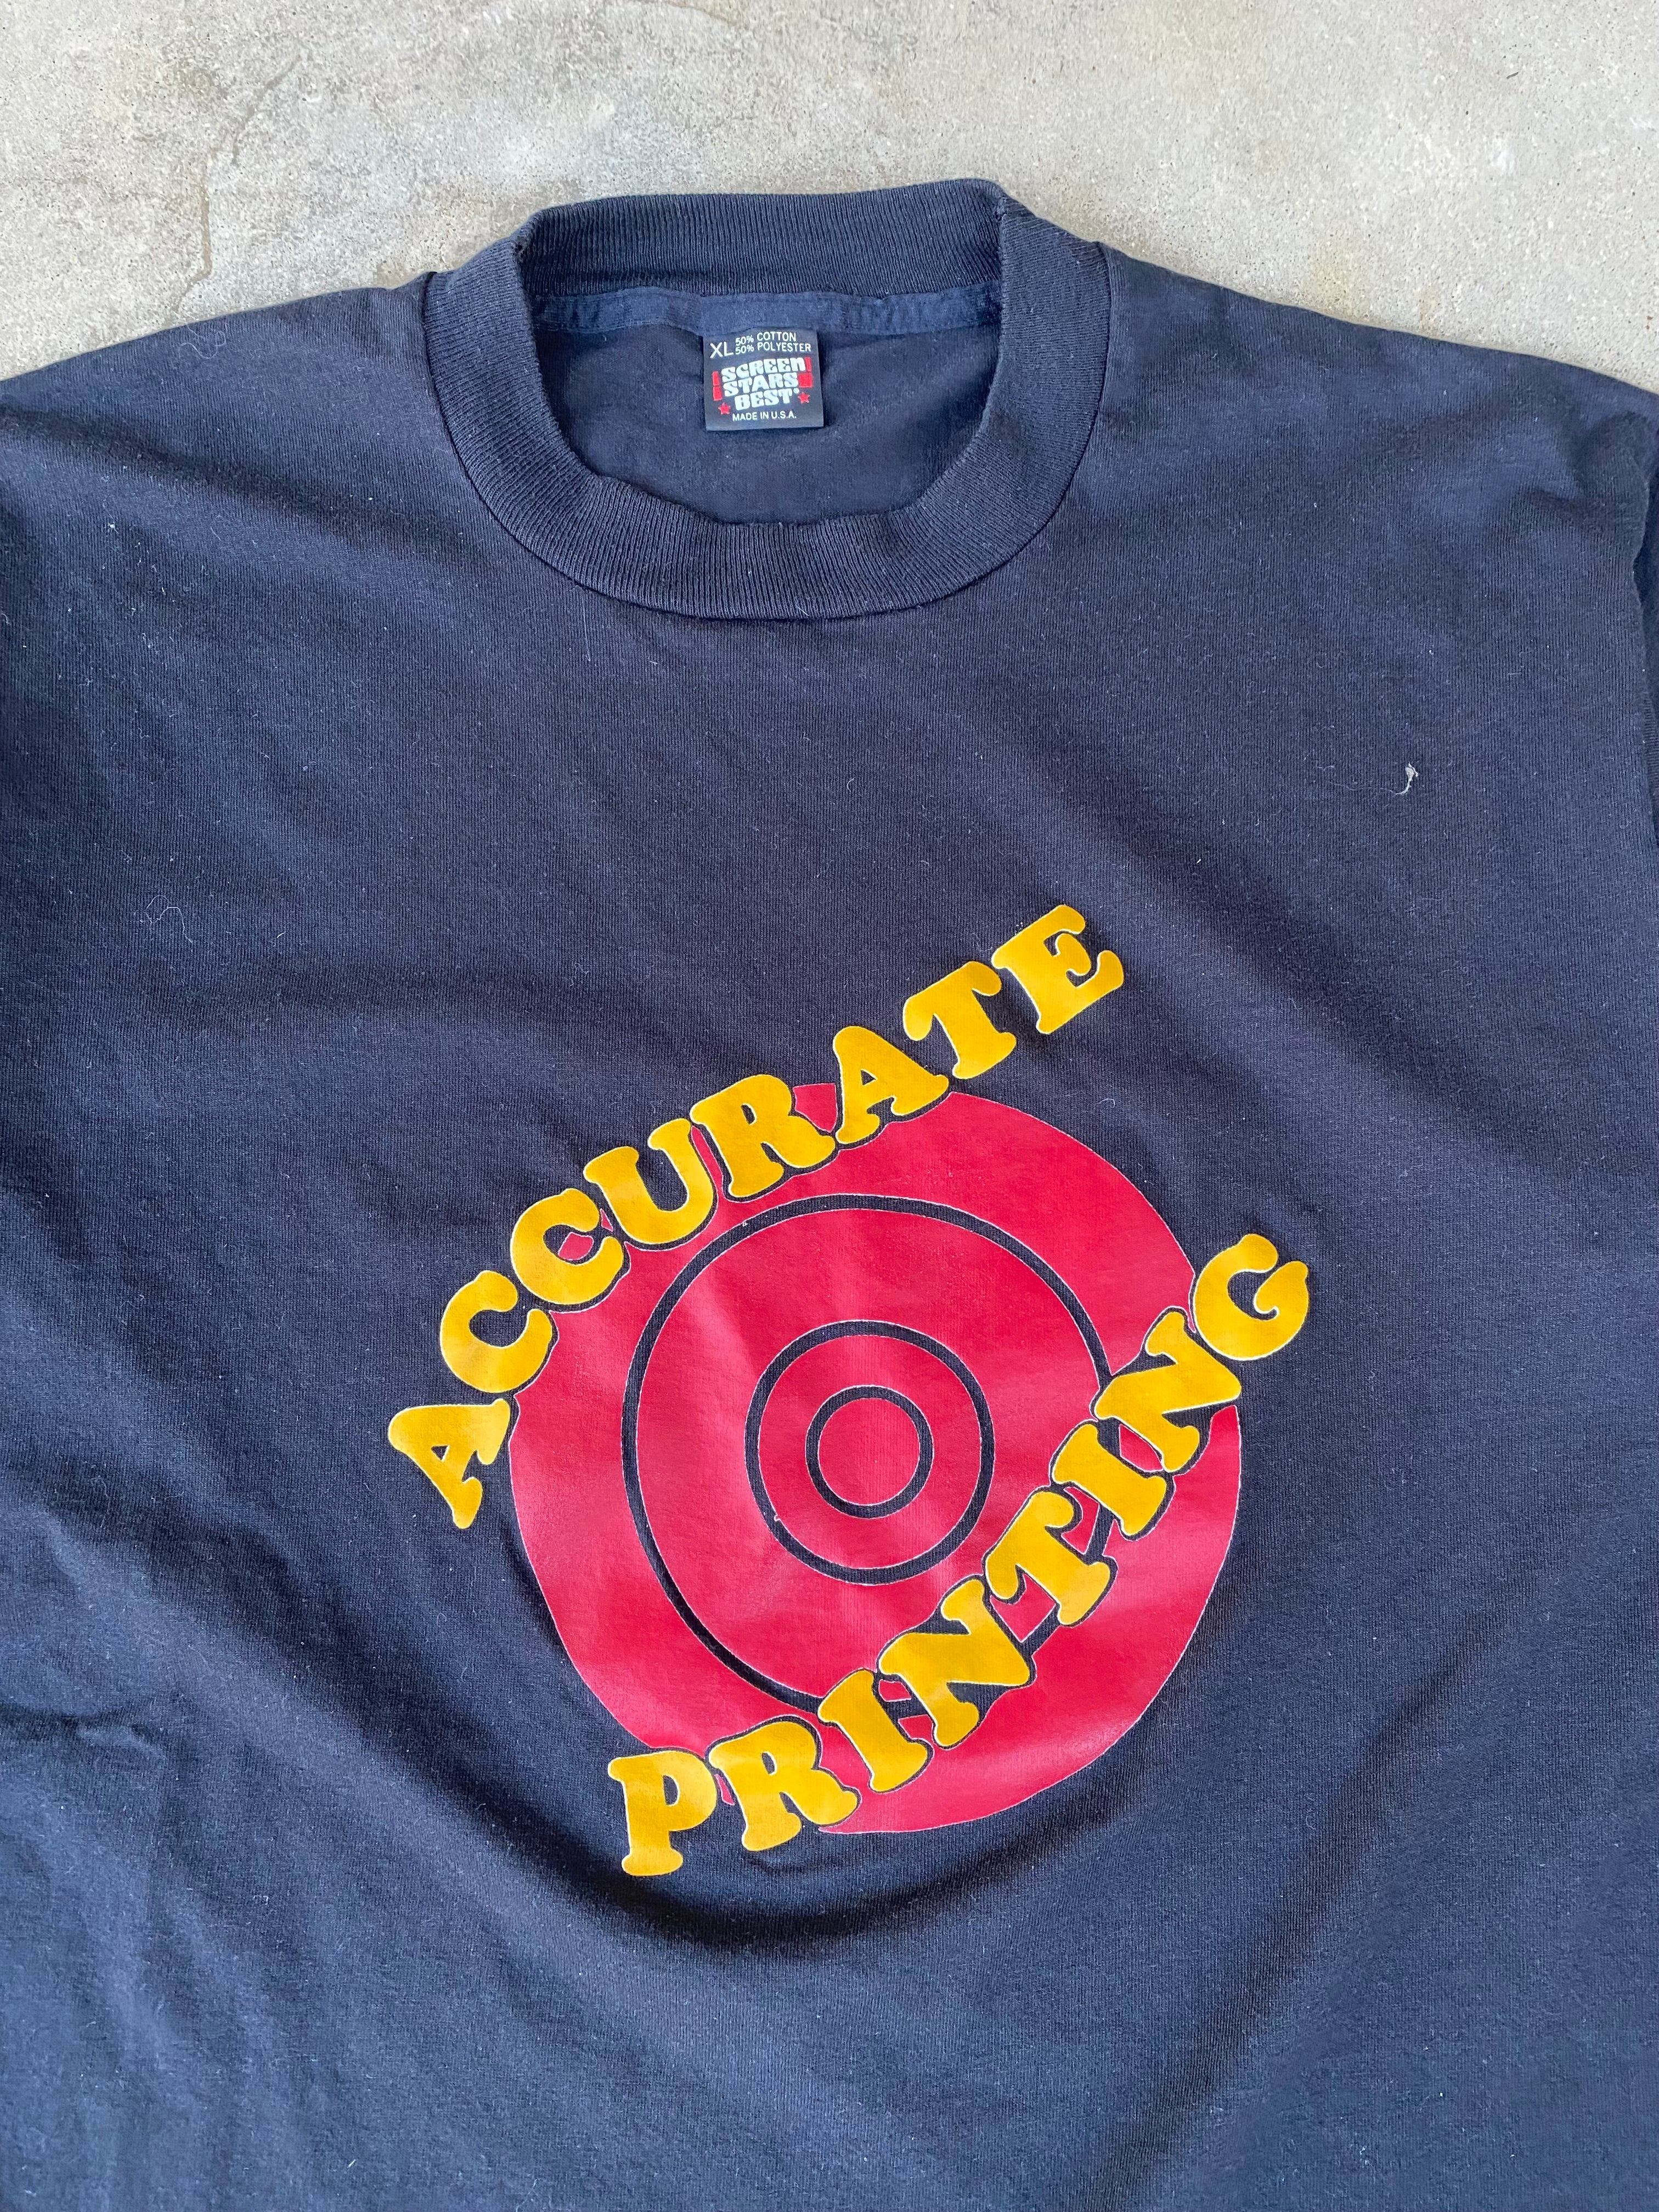 1990s Accurate Printing T-Shirt (L/XL)